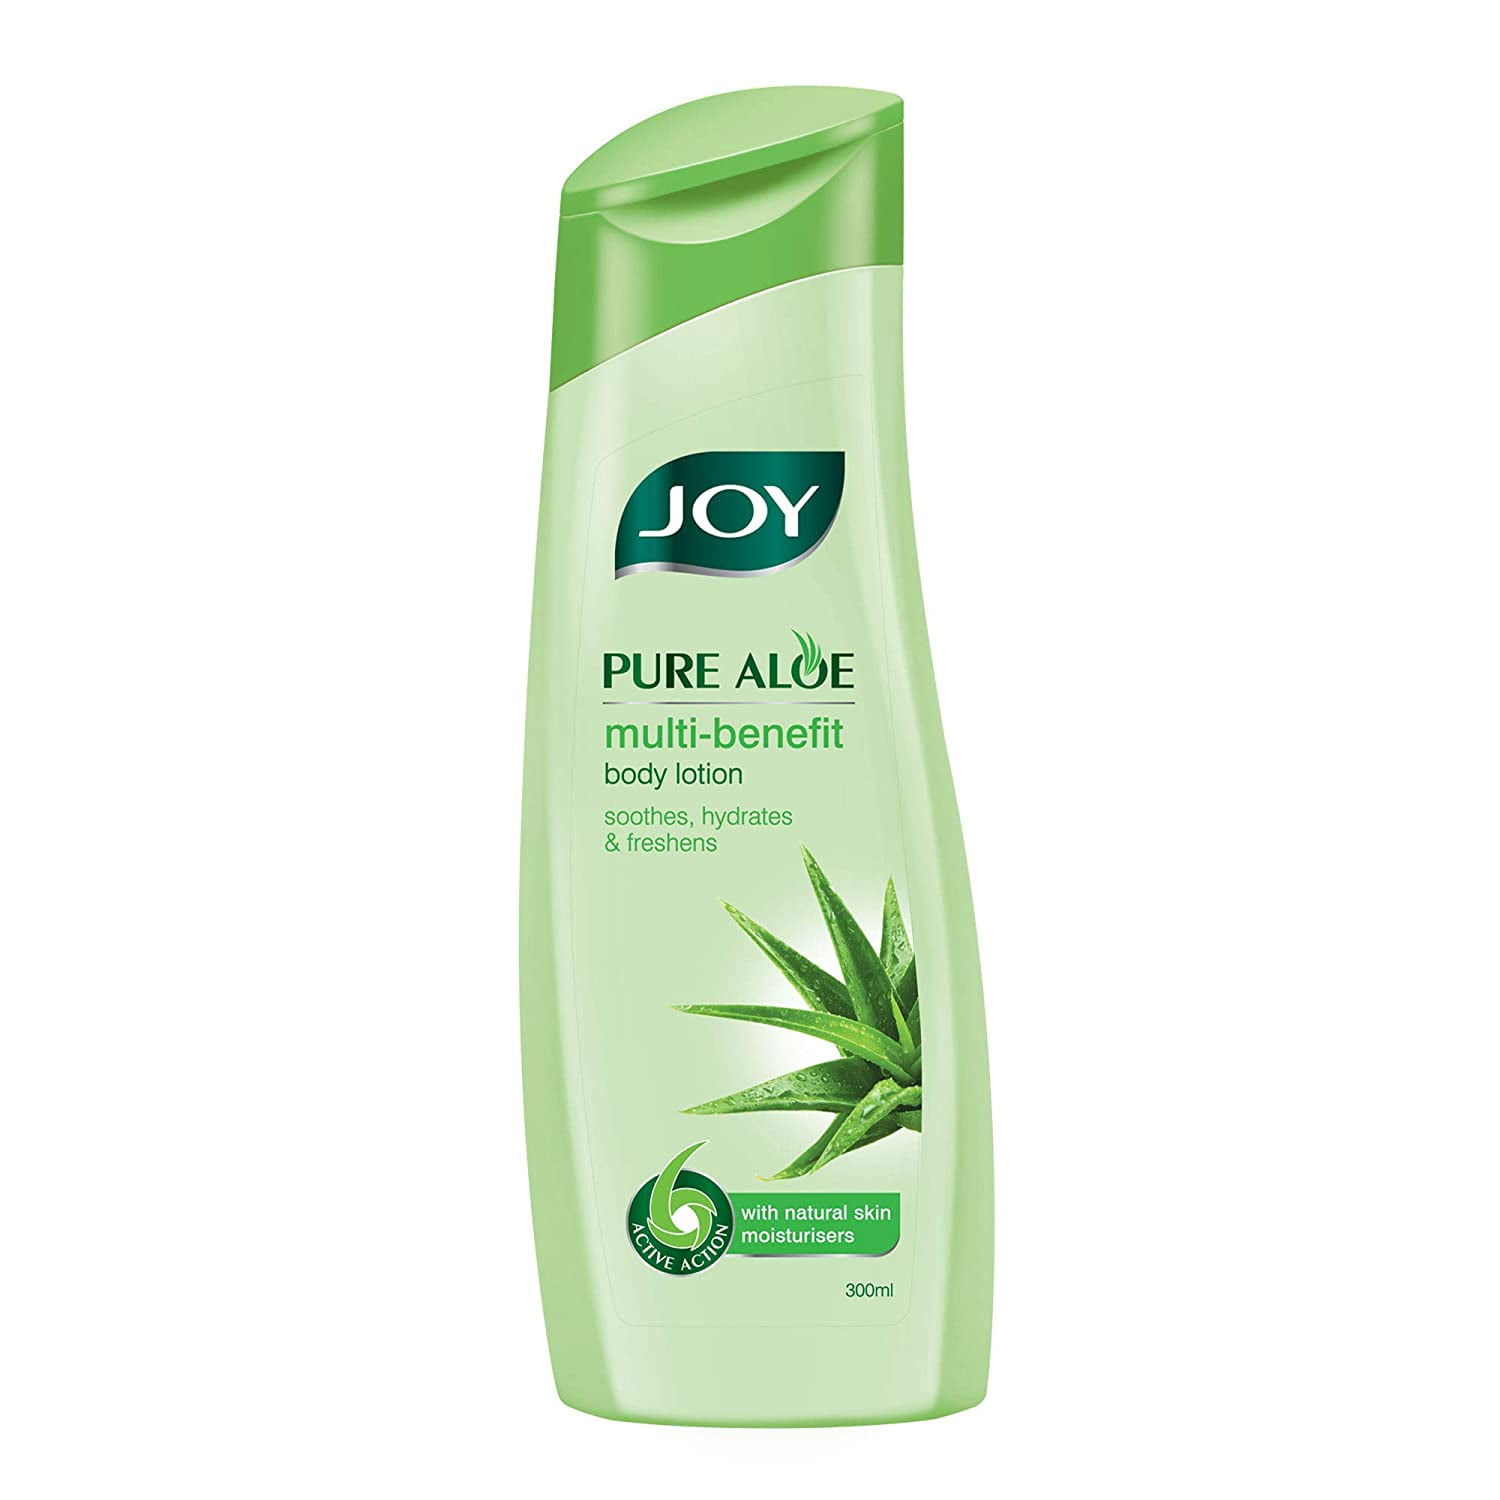 Moet besteden Onleesbaar Joy Pure Aloe | Multi-Benefit Aloe Vera Body Lotion | Soothes, hydrates &  freshens | Natural Skin Moisturizer for Body | For Normal to oily skin |  300 ml - Walmart.com